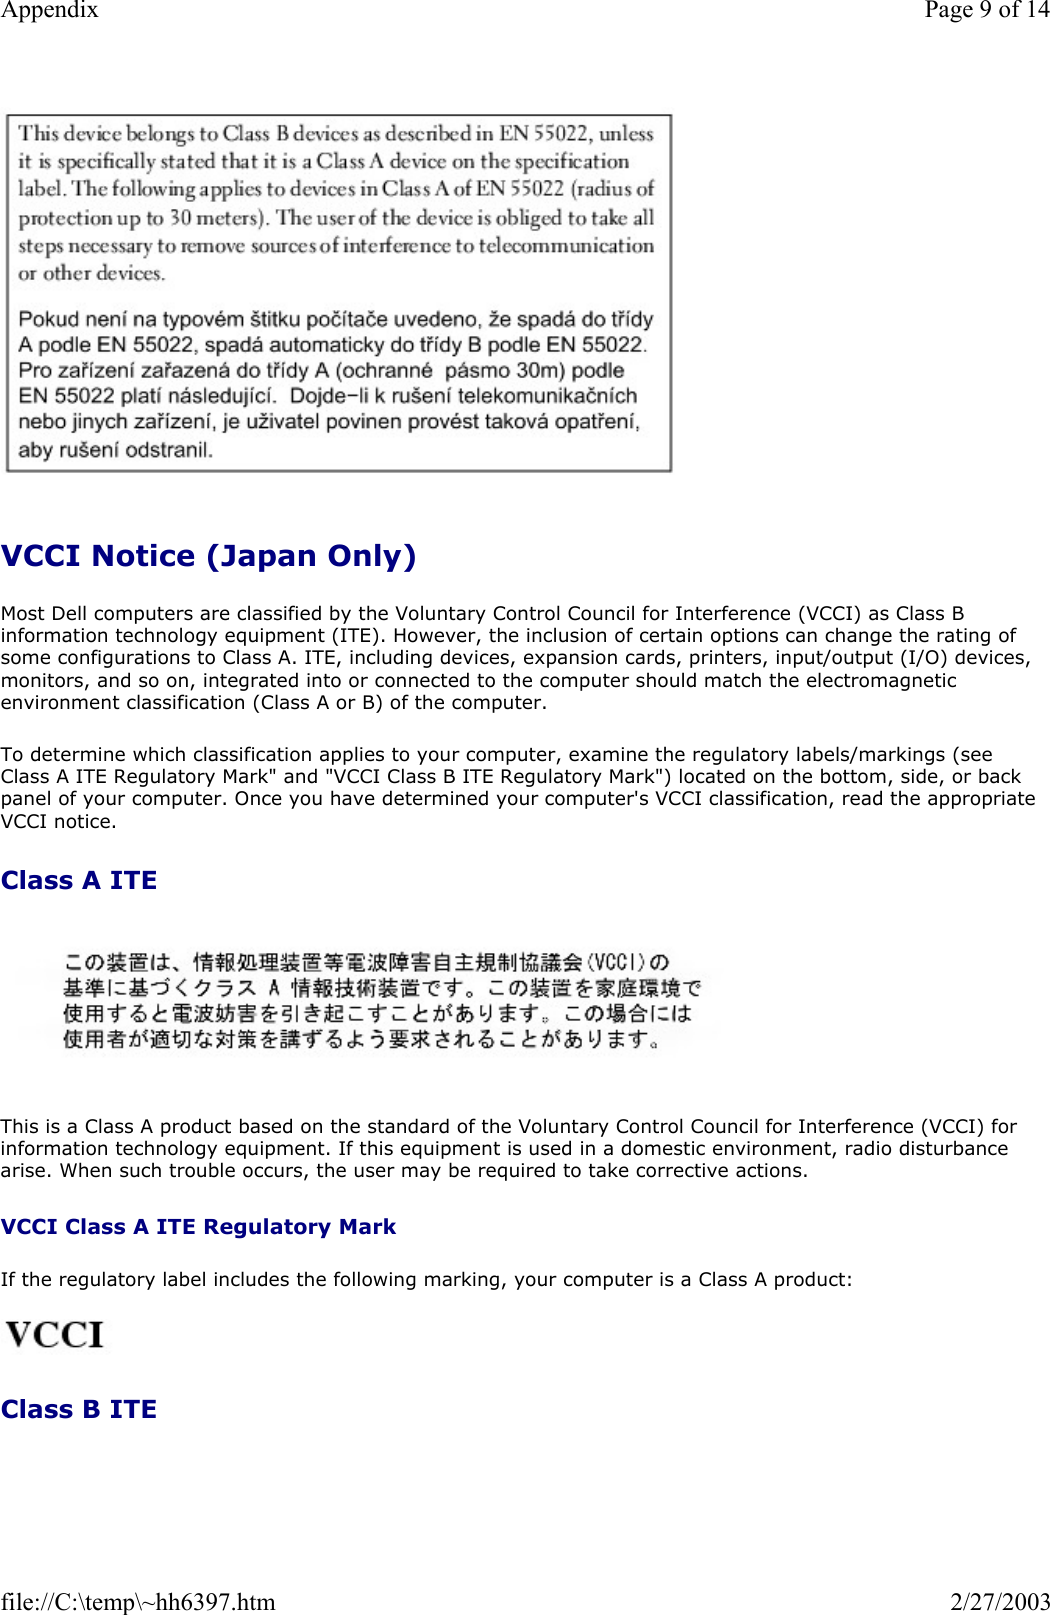   VCCI Notice (Japan Only) Most Dell computers are classified by the Voluntary Control Council for Interference (VCCI) as Class B information technology equipment (ITE). However, the inclusion of certain options can change the rating of some configurations to Class A. ITE, including devices, expansion cards, printers, input/output (I/O) devices, monitors, and so on, integrated into or connected to the computer should match the electromagnetic environment classification (Class A or B) of the computer. To determine which classification applies to your computer, examine the regulatory labels/markings (see Class A ITE Regulatory Mark&quot; and &quot;VCCI Class B ITE Regulatory Mark&quot;) located on the bottom, side, or back panel of your computer. Once you have determined your computer&apos;s VCCI classification, read the appropriate VCCI notice. Class A ITE   This is a Class A product based on the standard of the Voluntary Control Council for Interference (VCCI) for information technology equipment. If this equipment is used in a domestic environment, radio disturbance arise. When such trouble occurs, the user may be required to take corrective actions. VCCI Class A ITE Regulatory Mark  If the regulatory label includes the following marking, your computer is a Class A product:    Class B ITE Page 9 of 14Appendix2/27/2003file://C:\temp\~hh6397.htm